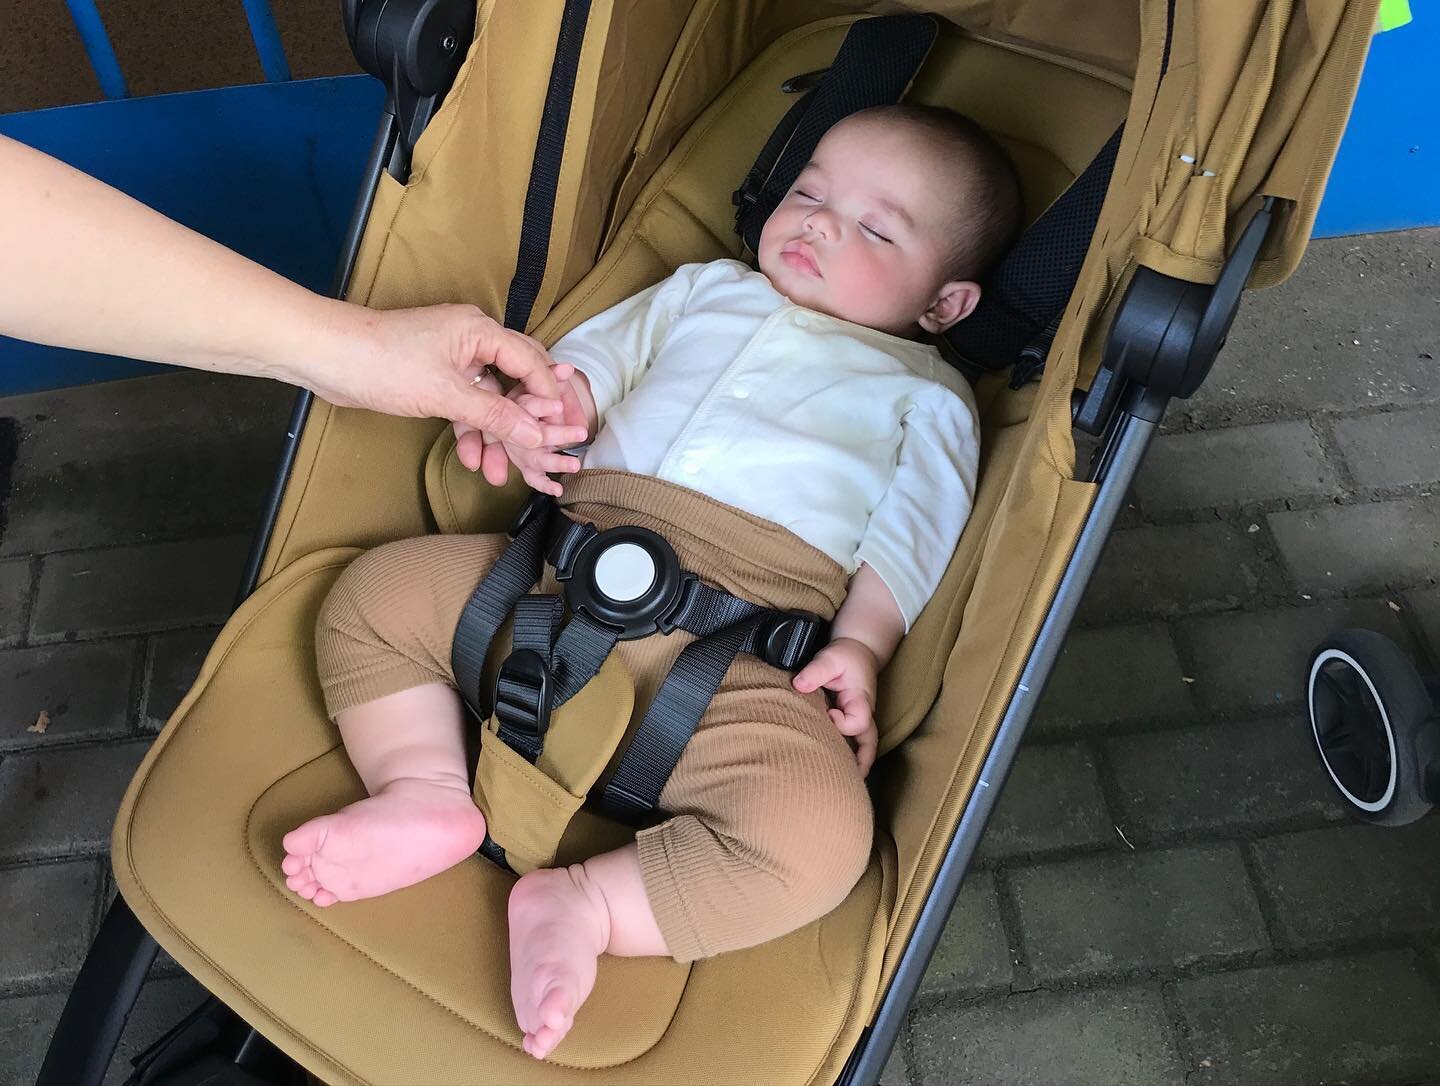 @myjoolz  Loving our Aer+ strollers. Didn't think it would work well for babies but our 4 month old sleeps well in it. Most recently used the rain cover which is also well designed. Only negative is the travel bag it came with already has holes in it